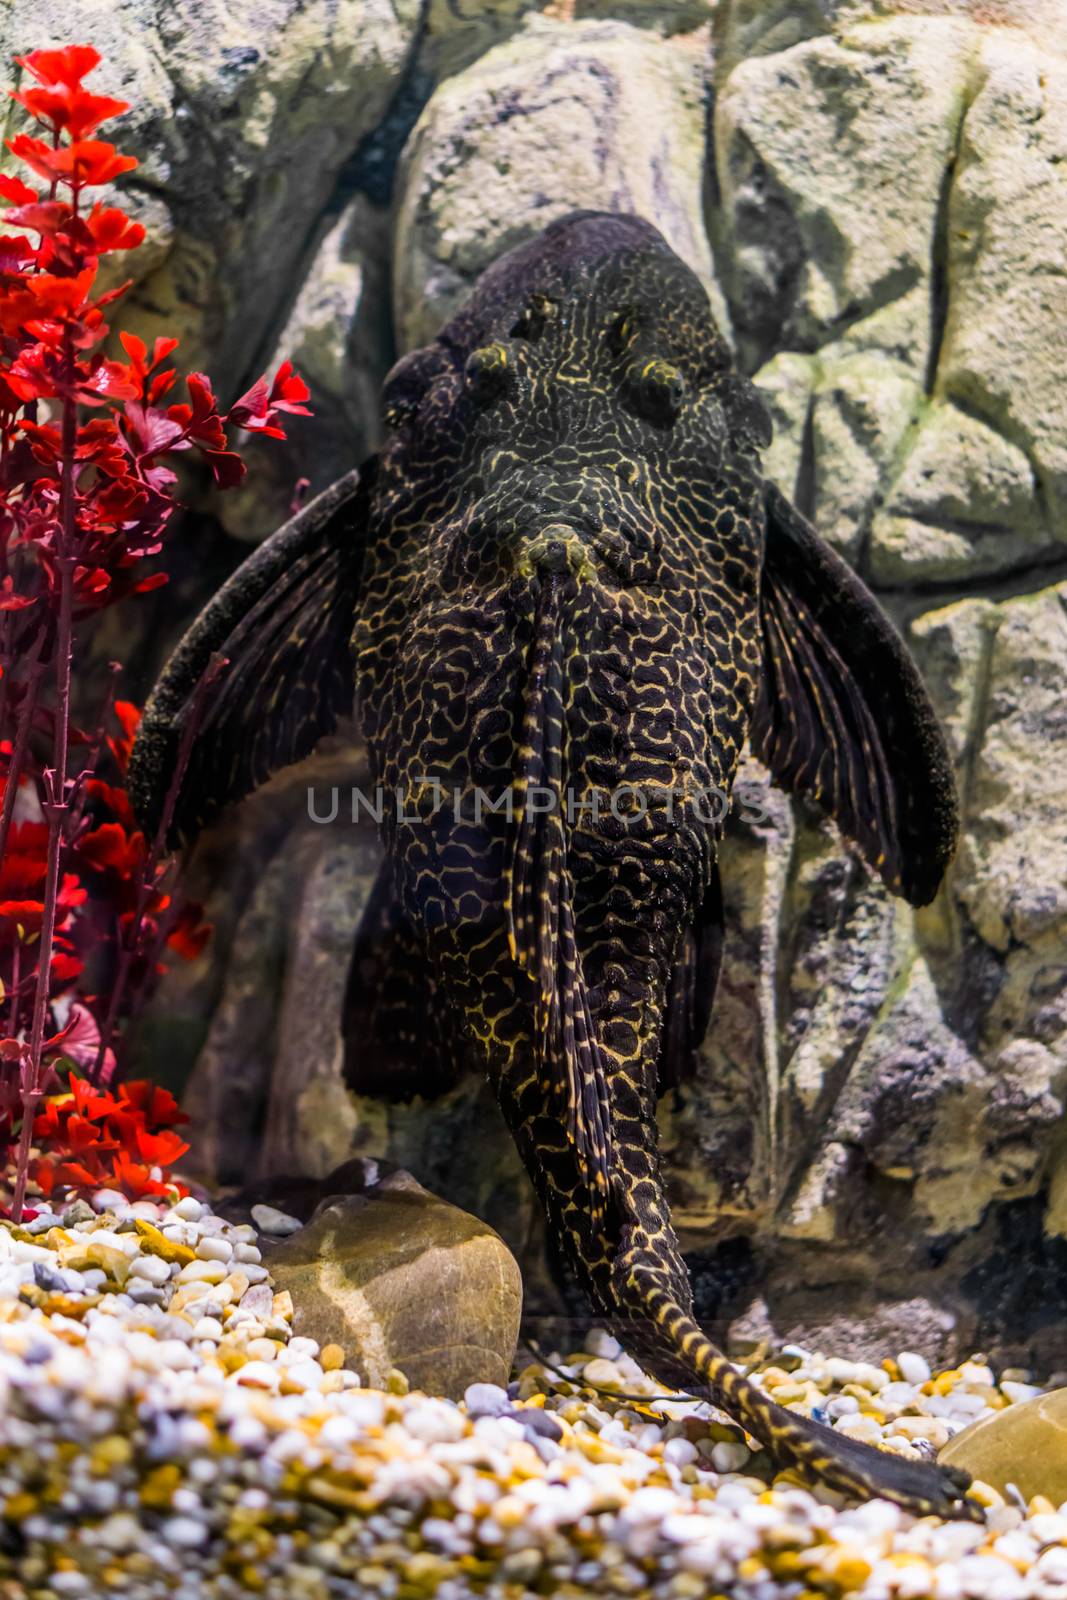 Orinoco sailfin catfish, common pleco with a black and yellow mottled pattern, tropical fish from the rivers of mexico by charlottebleijenberg